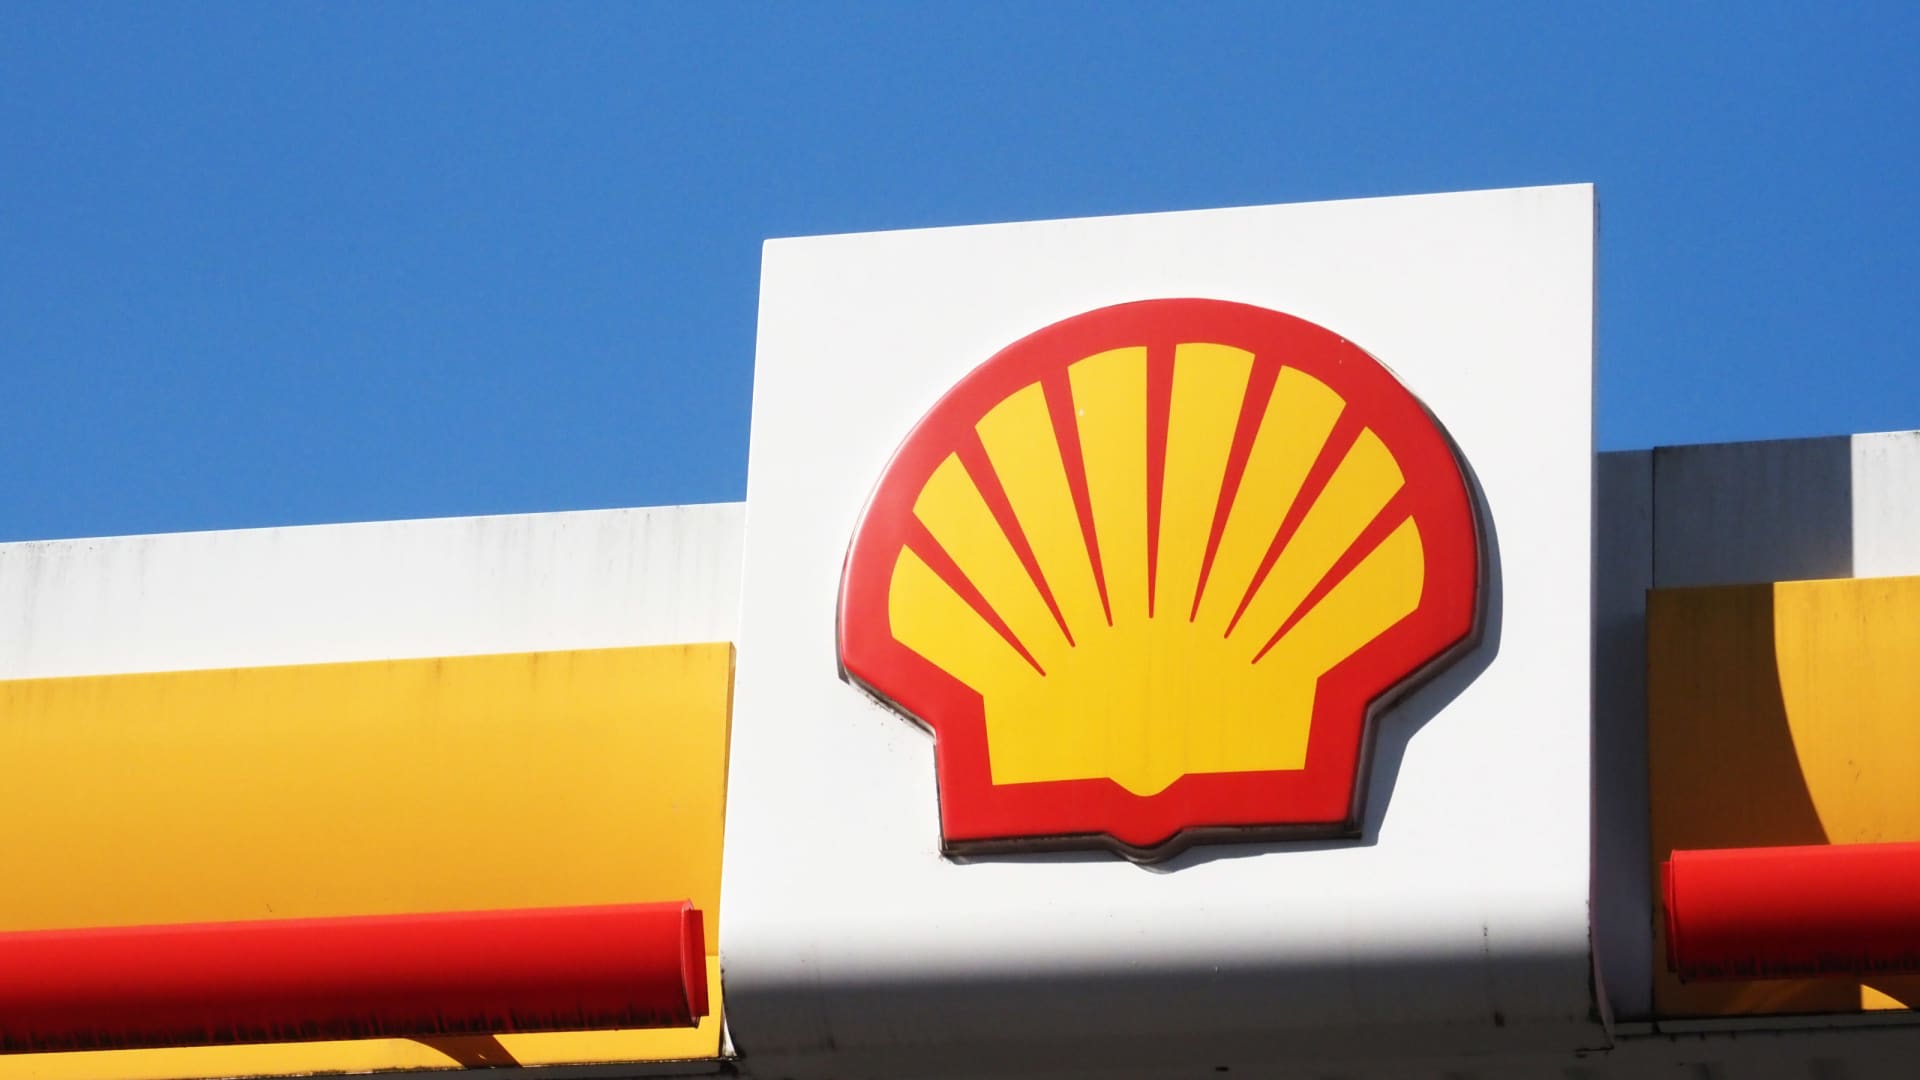 Shell beats expectations with $9.6 billion in first-quarter profit